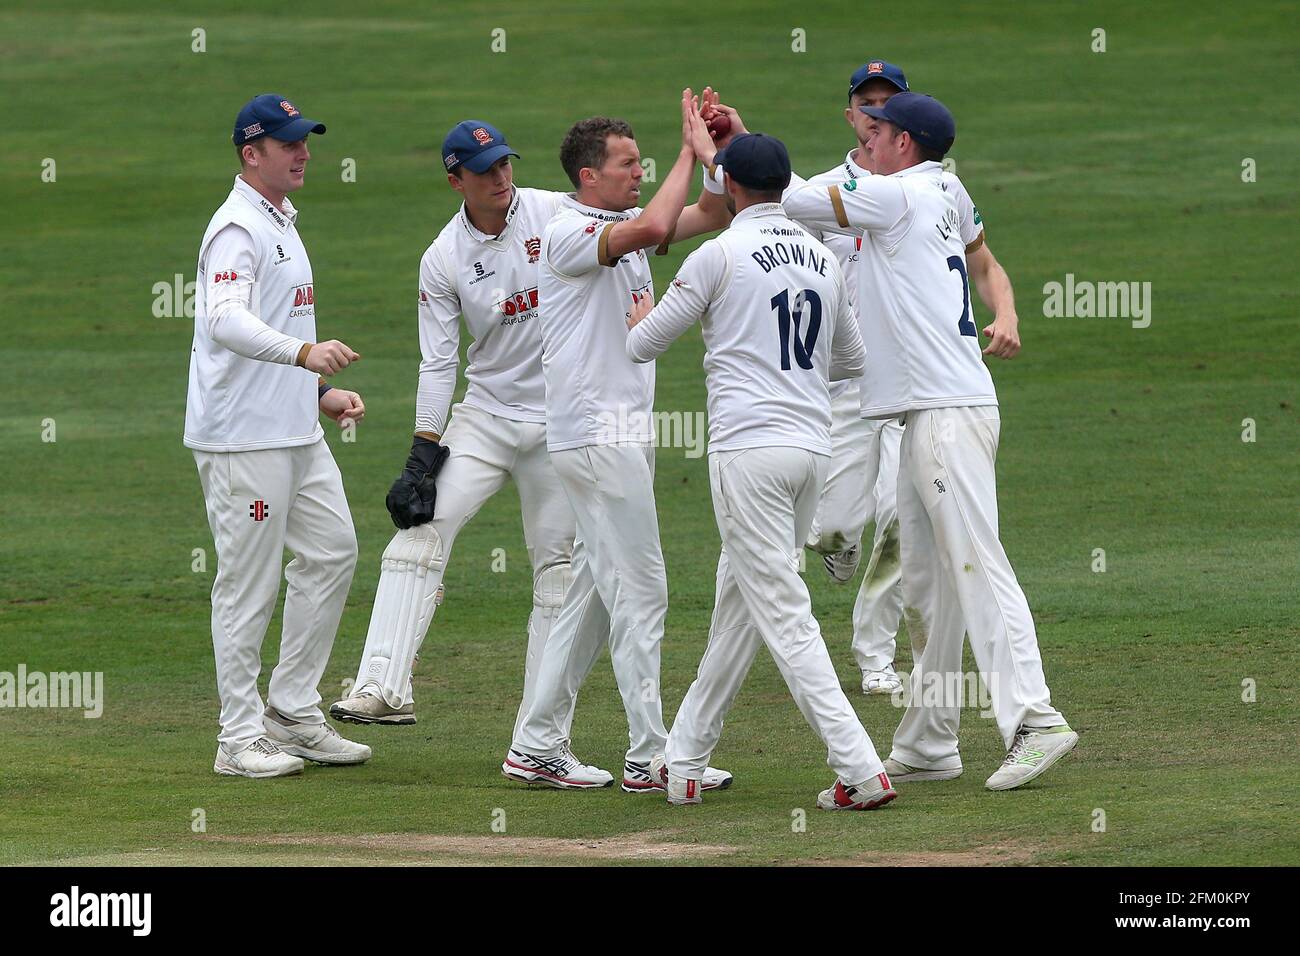 Peter Siddle of Essex celebrates with his team mates after taking the wicket of Will Jacks during Essex CCC vs Surrey CCC, Specsavers County Champions Stock Photo